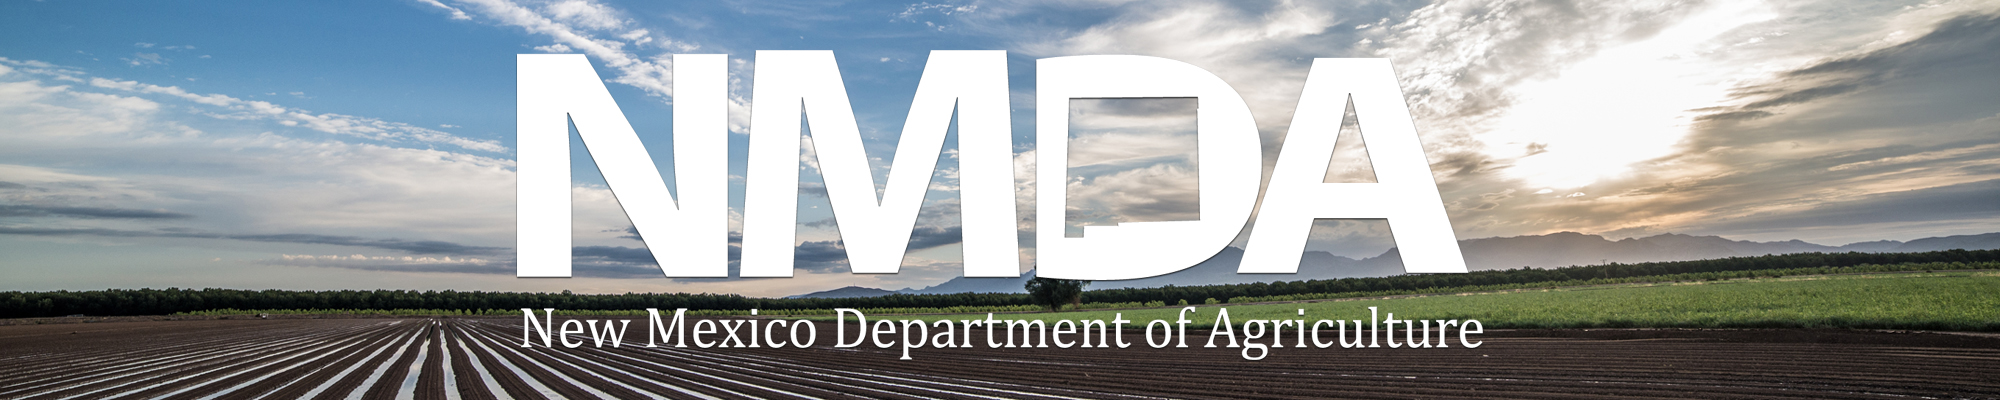 New Mexico Department of Agriculture Banner Image